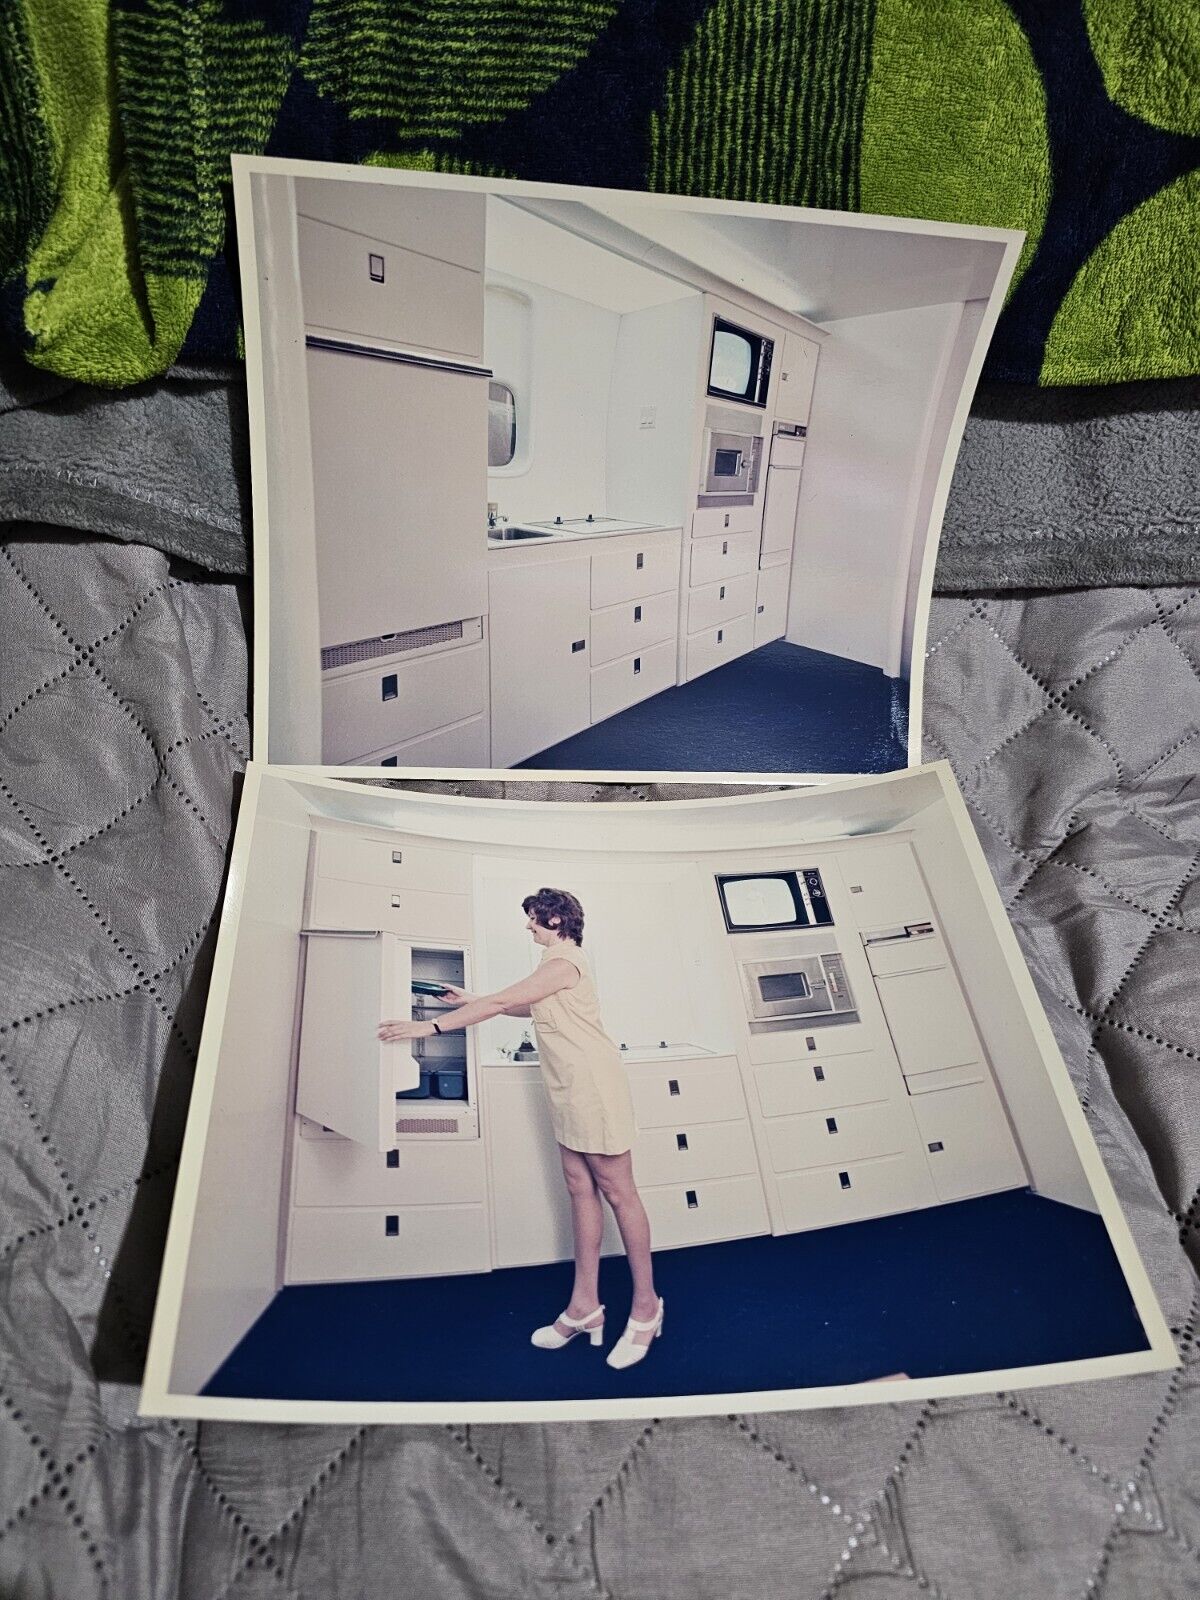 2 Vintage Airlines Airplane Kitchen Photographs Air Research Flight Attendant